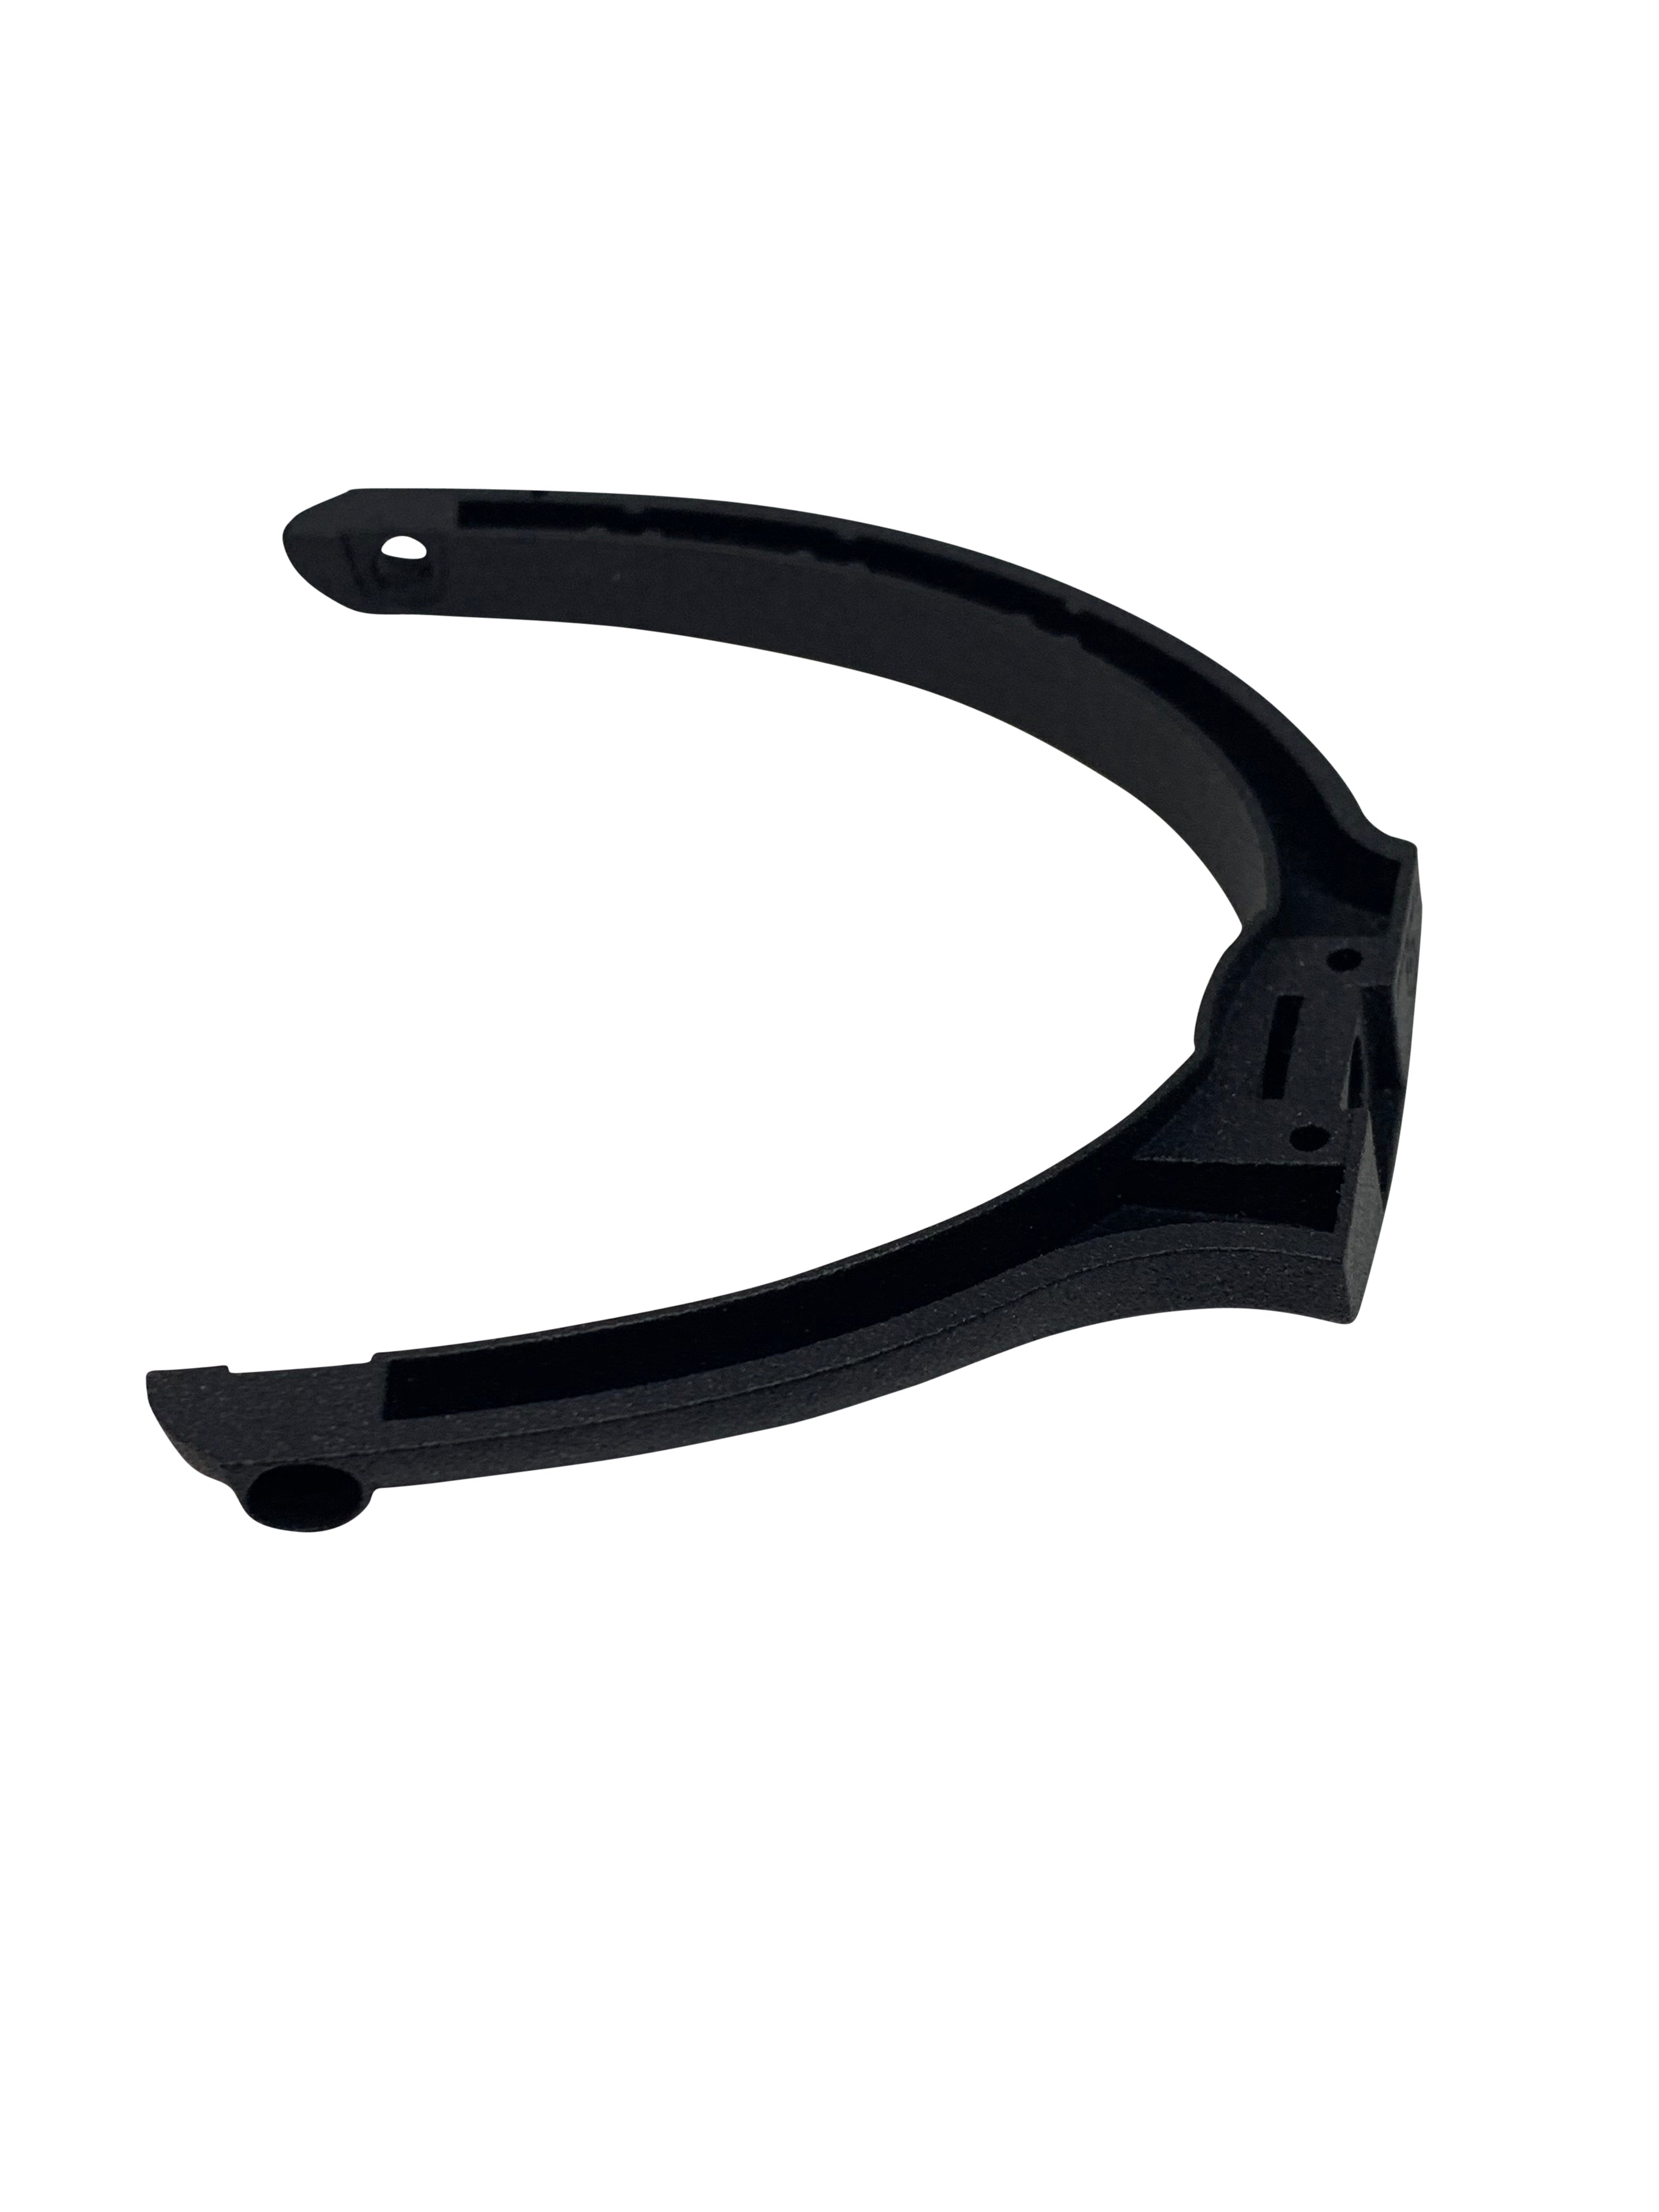 Bose Aviation Headset X (A10) Upgraded Replacement Parts Kit Yoke Stirrups Wishbone Ear Cup Mount - CentralSound